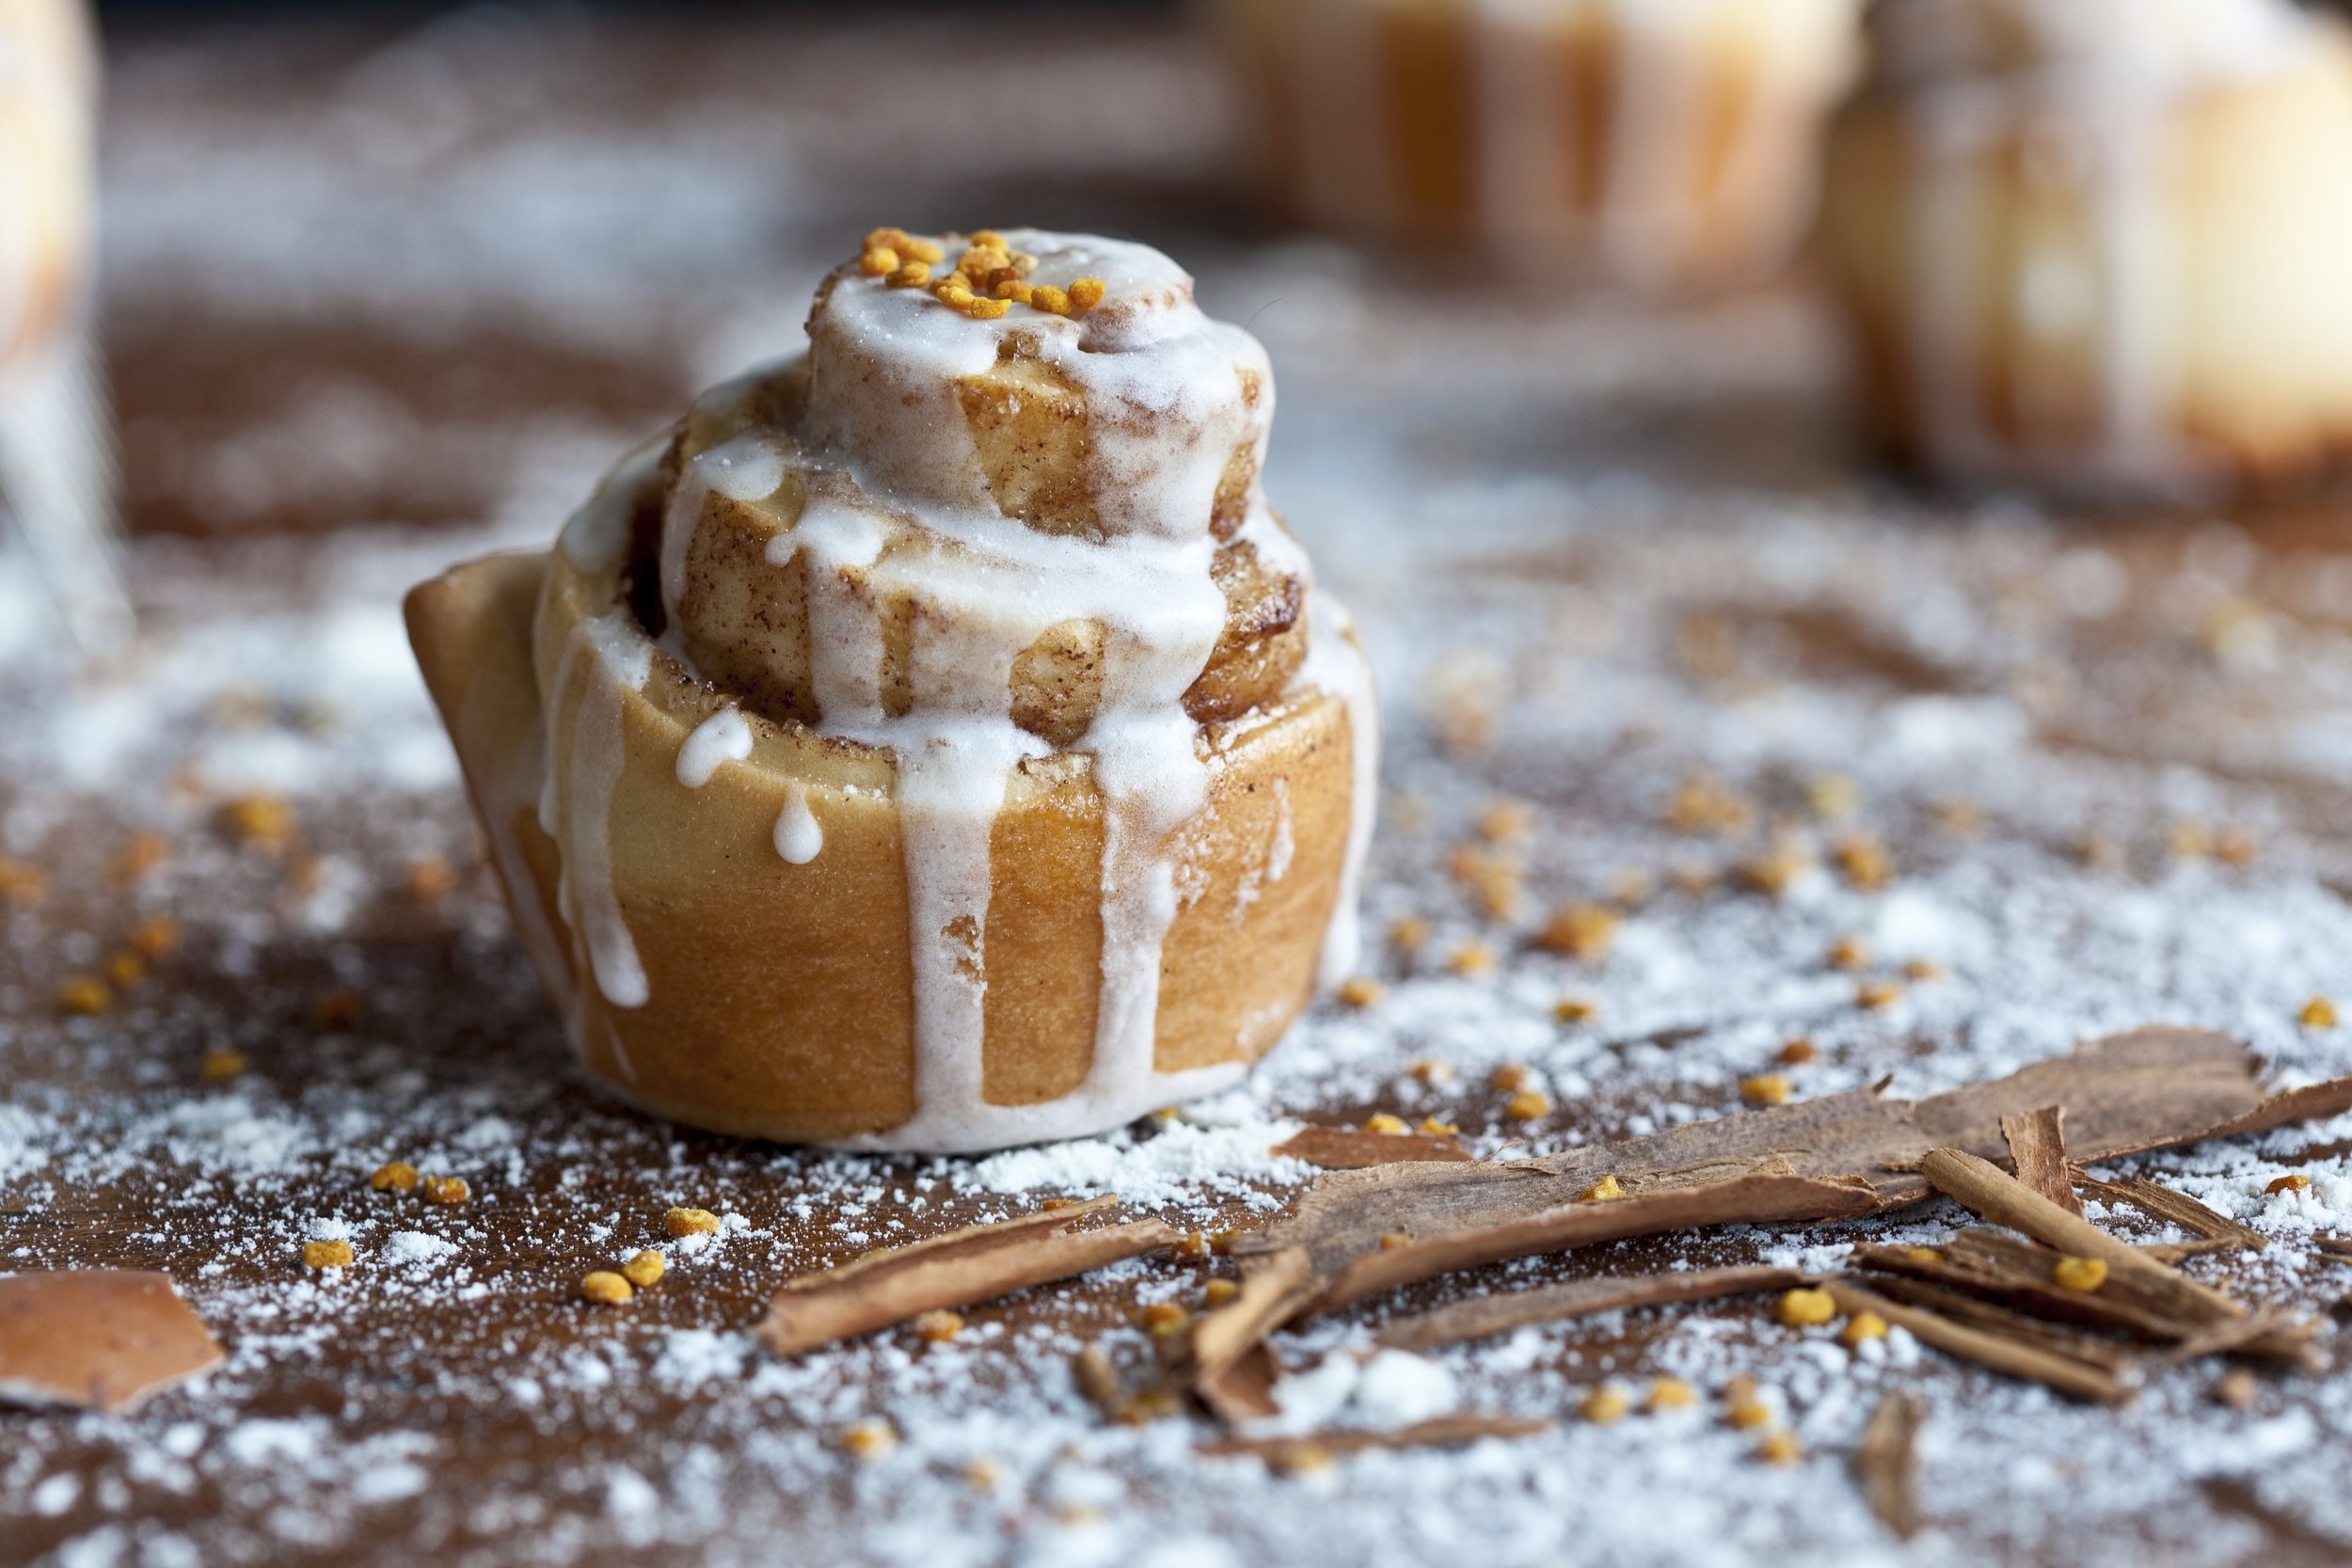 StockFood_11500994_HiRes_A_cinnamon_roll_with_icing_close_up.jpg